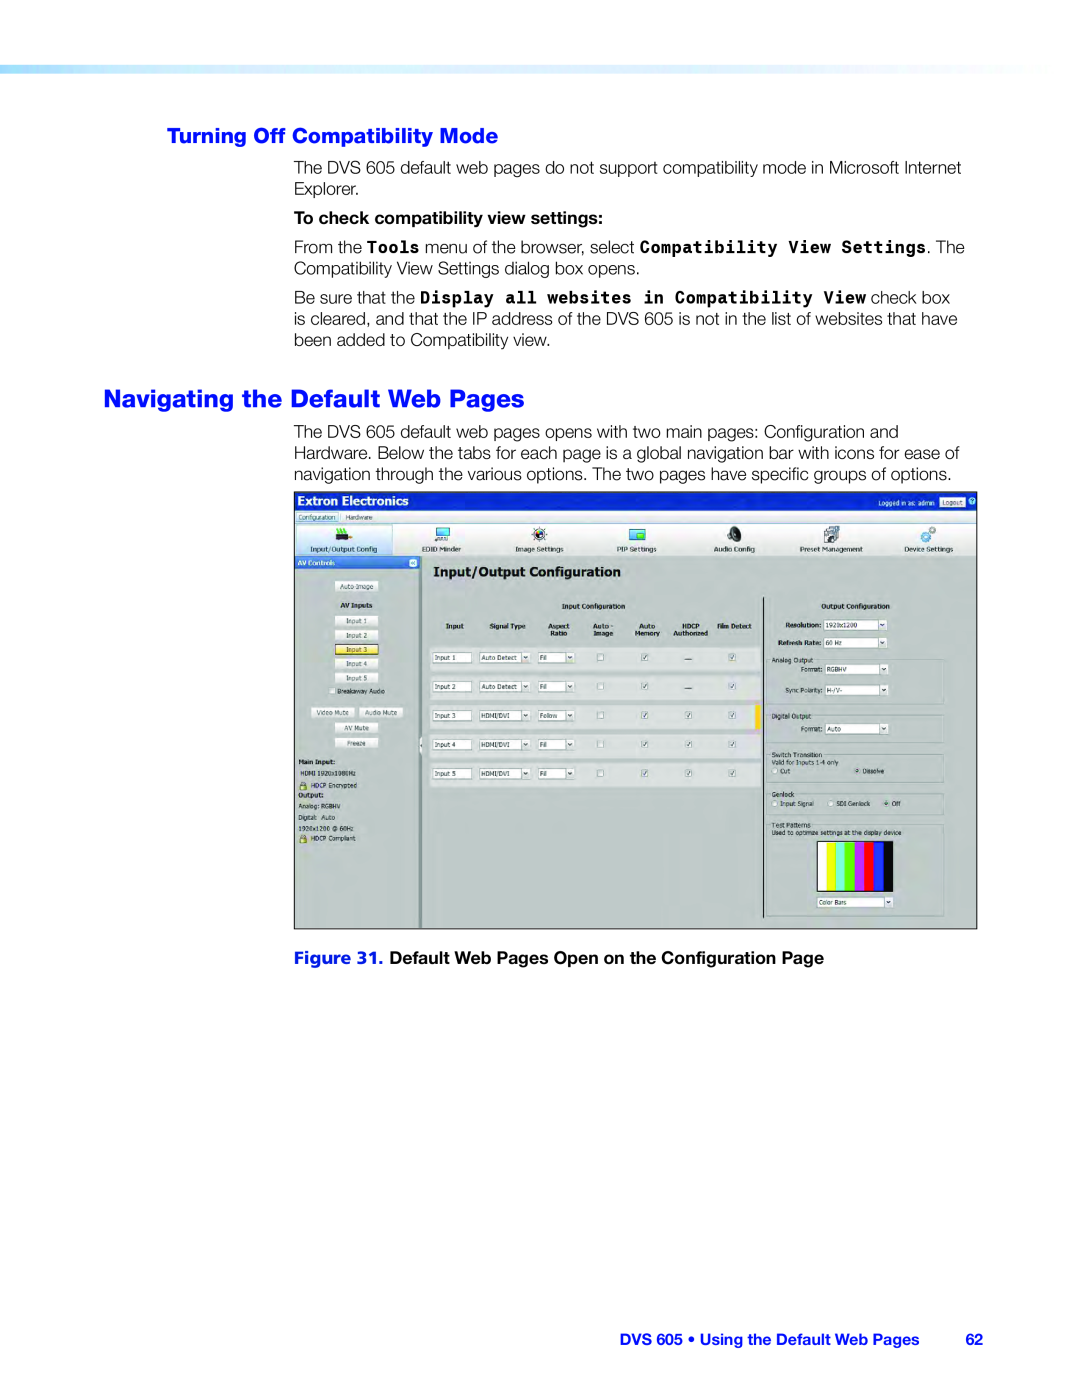 Extron electronic DVS 605 manual Navigating the Default Web Pages, Turning Off Compatibility Mode 